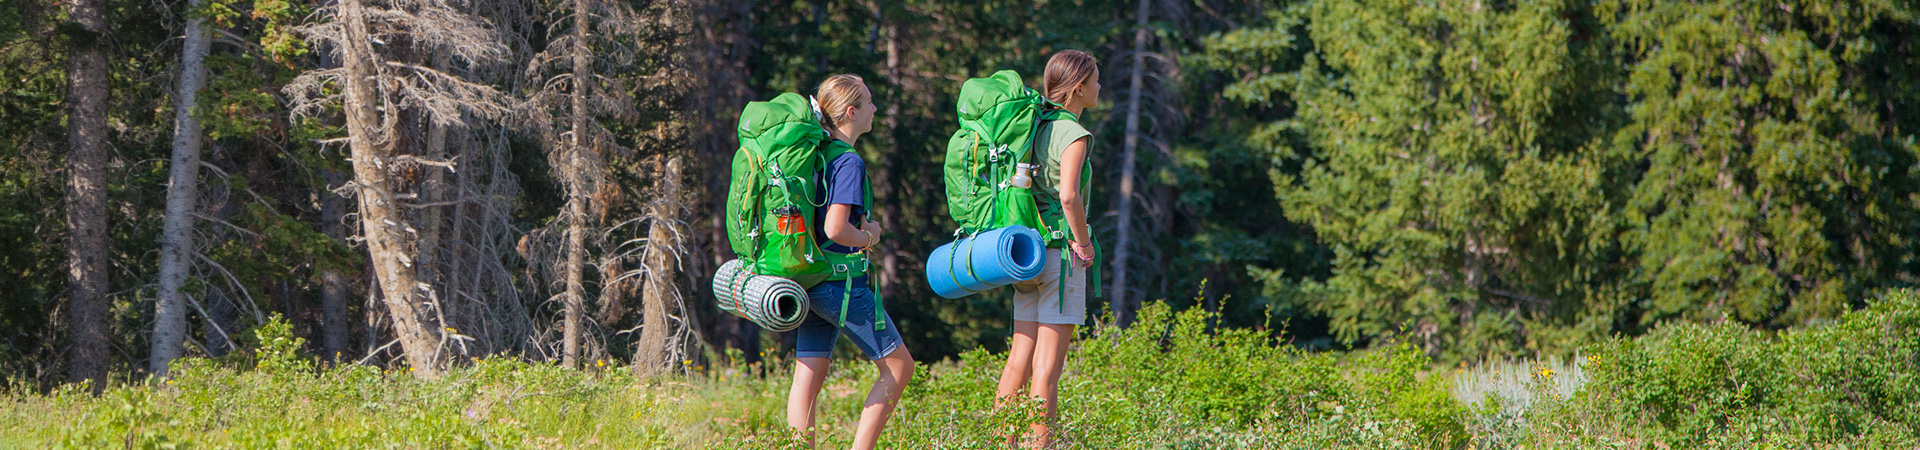  two girl scouts carrying large backpacks hiking through the woods 